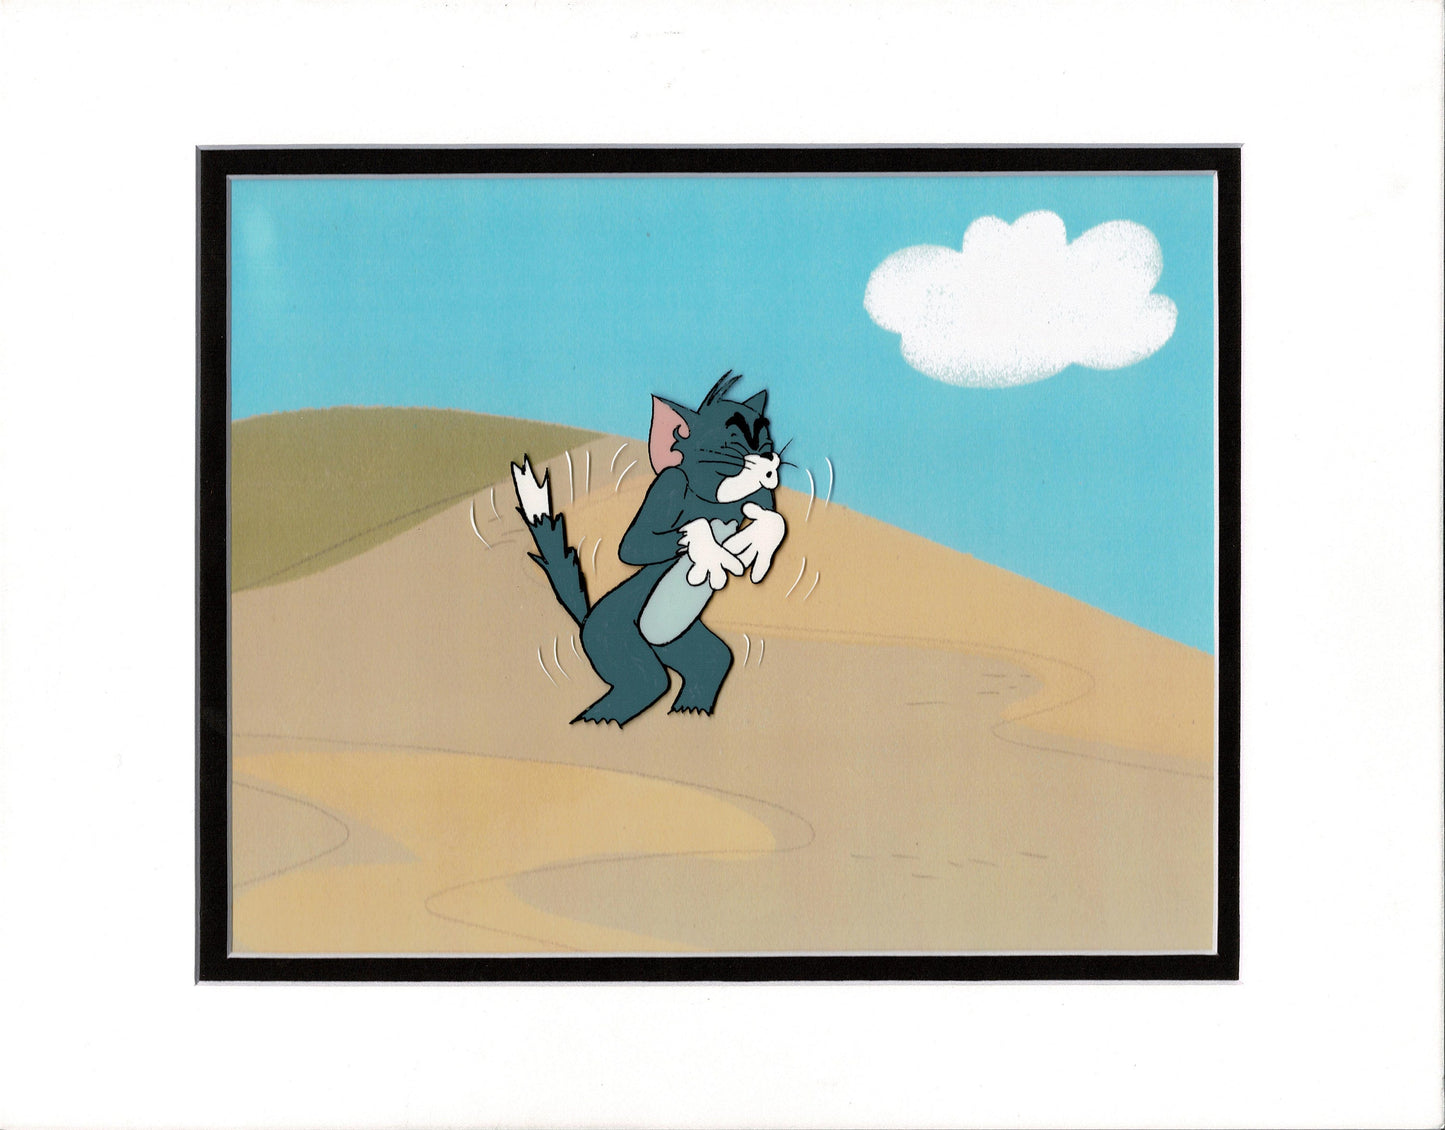 Tom & Jerry Original Production Animation Cel from Filmation 1980-82 tjt3m